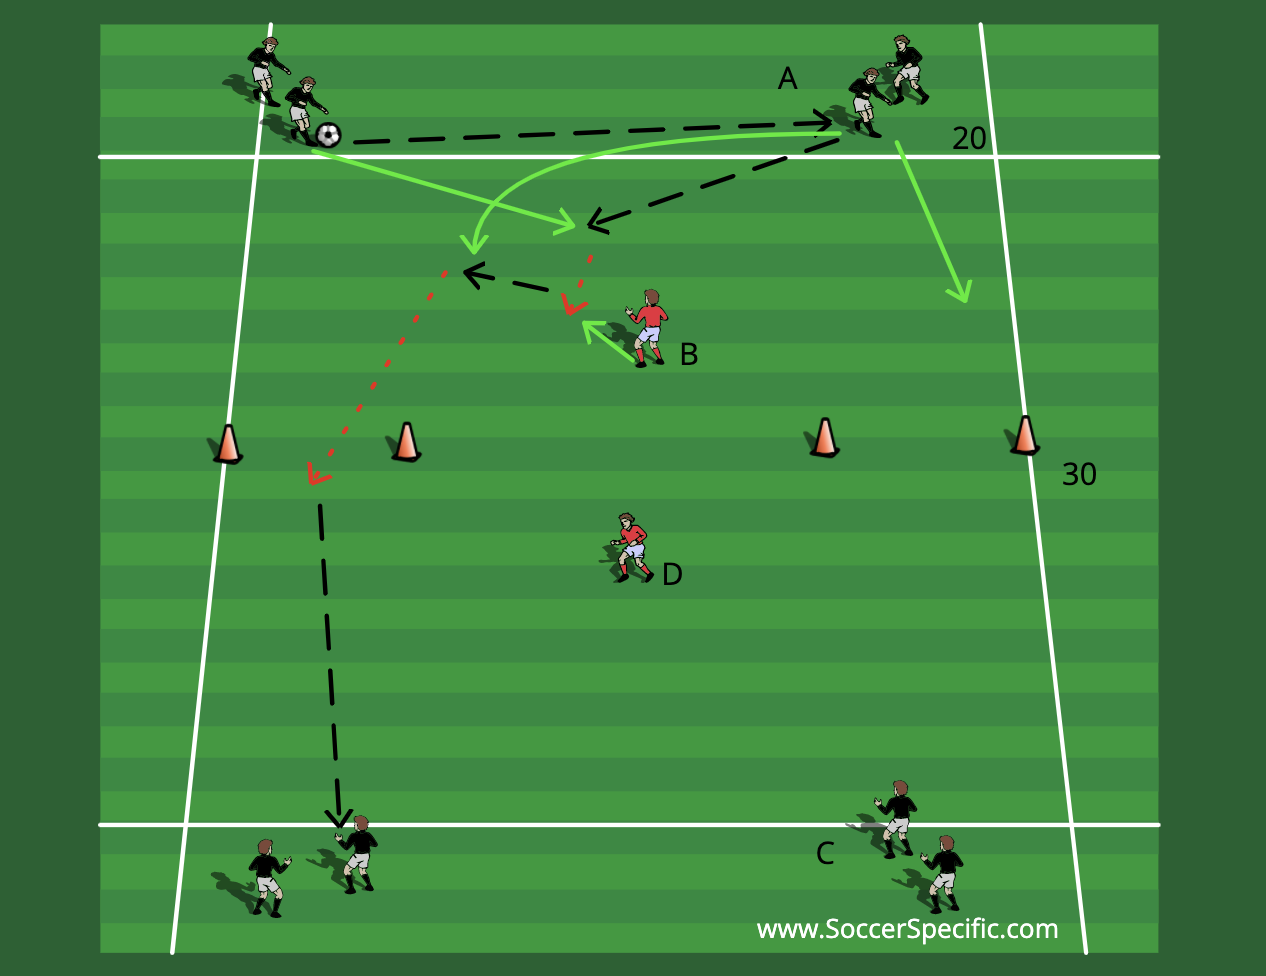 The Art of Penetration 2 | SoccerSpecific.com